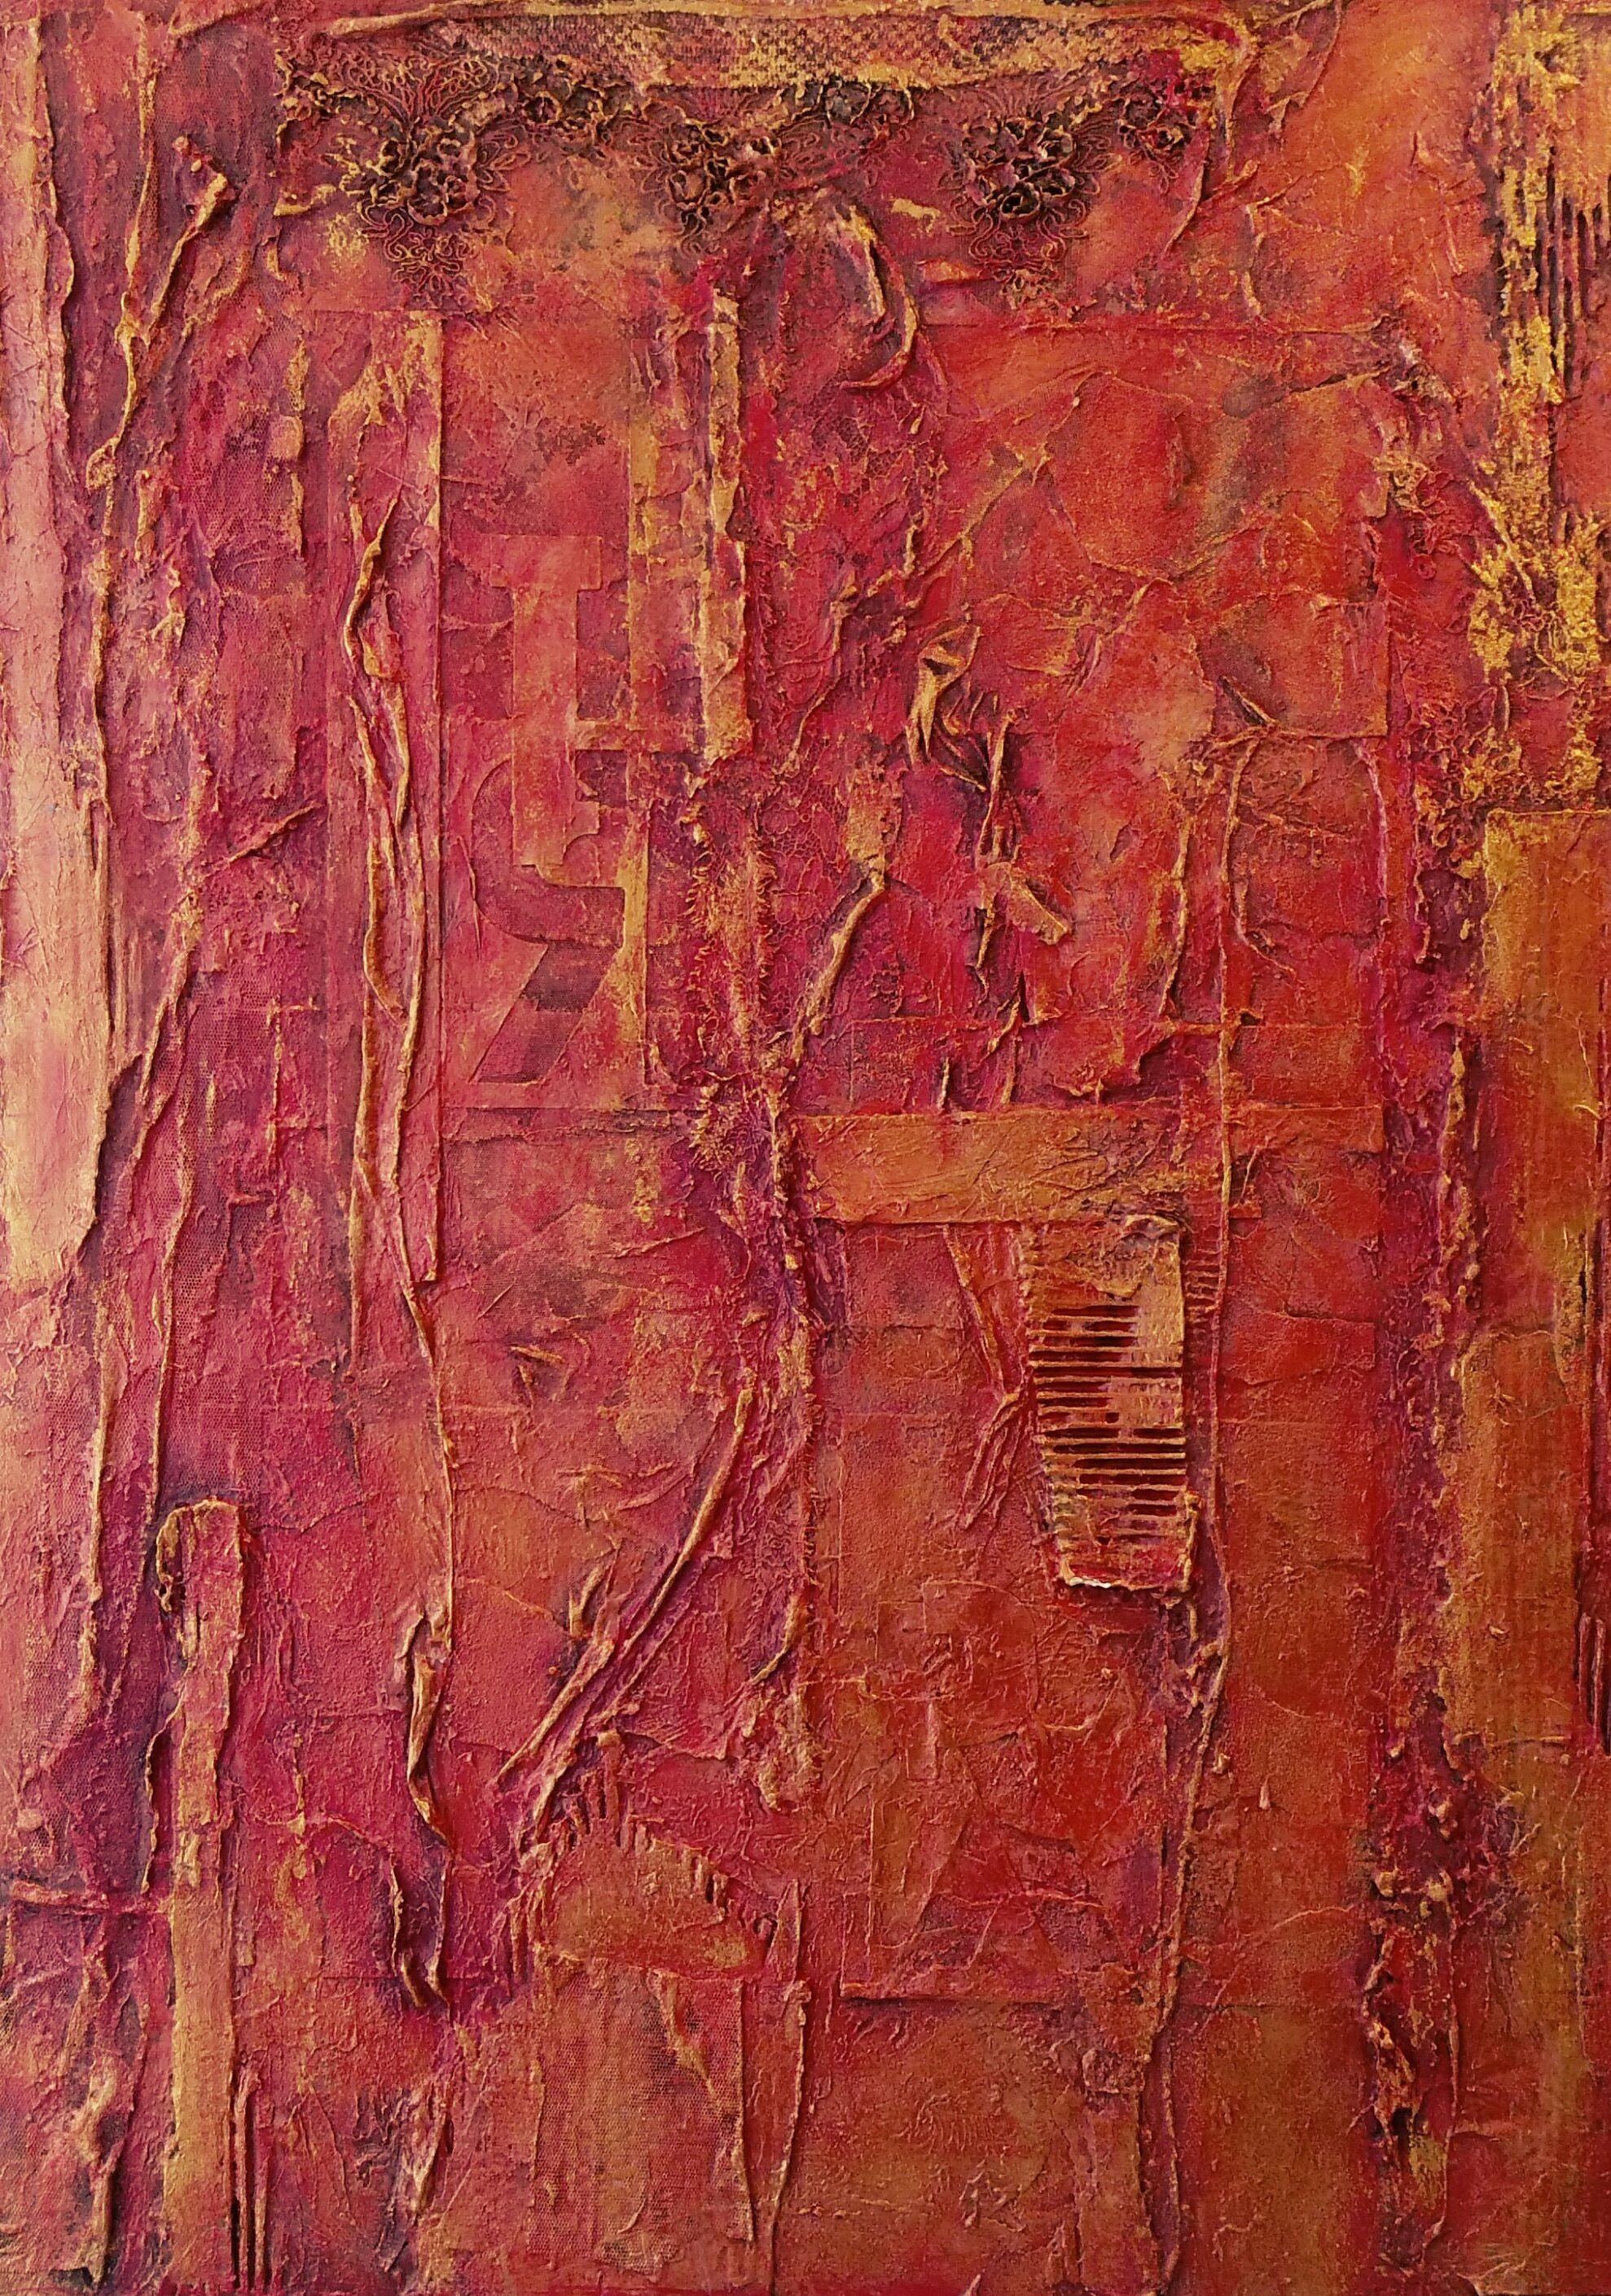 Red and Metallic Gold, 36